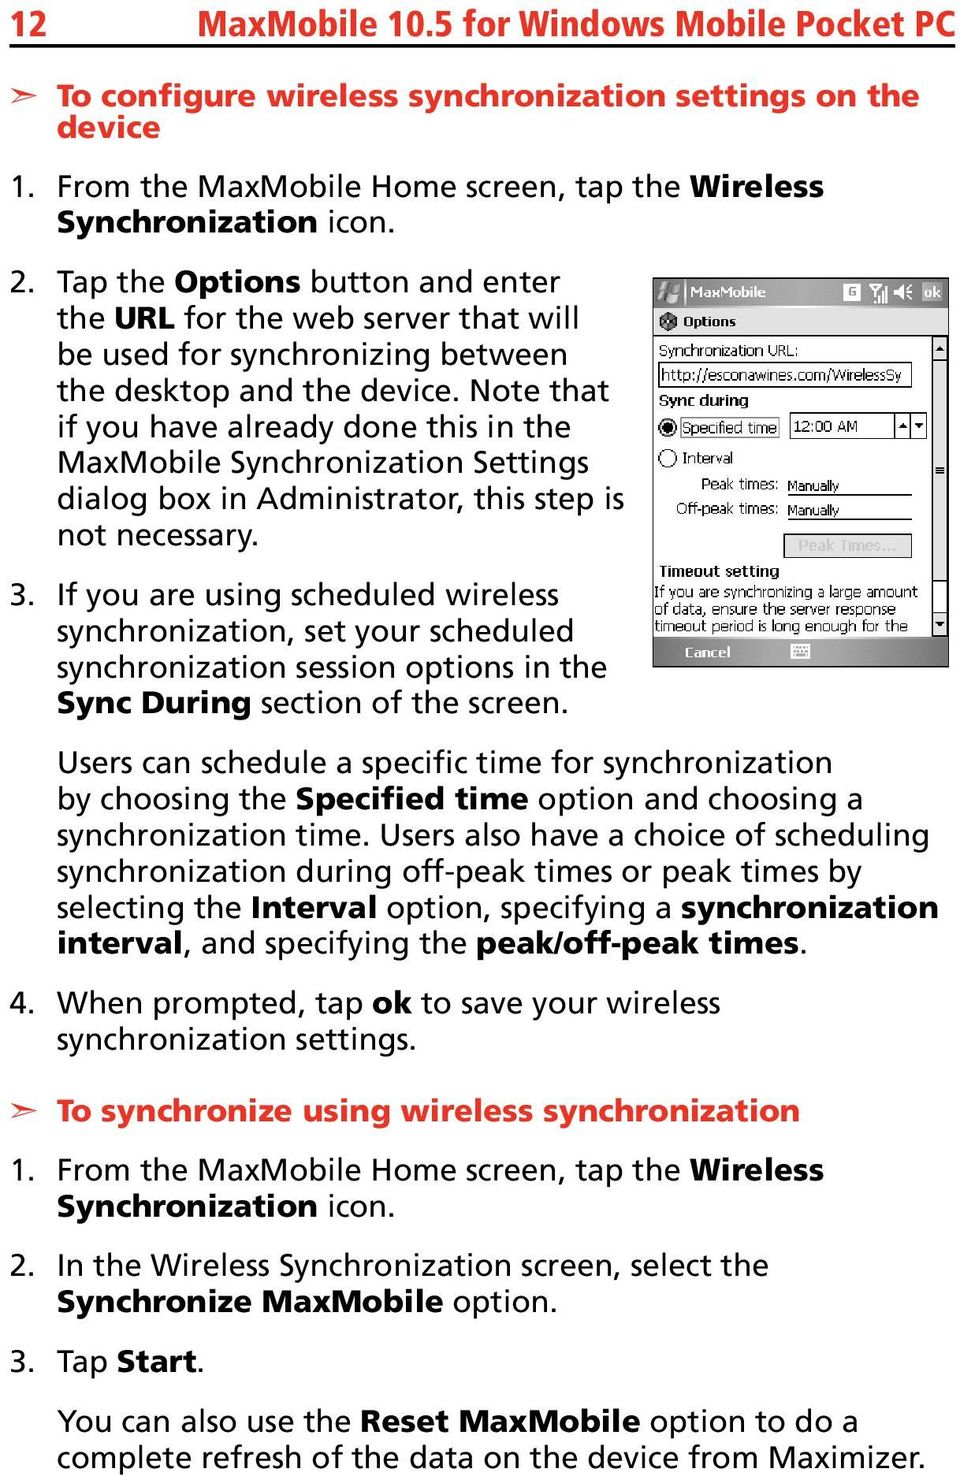 Note that if you have already done this in the MaxMobile Synchronization Settings dialog box in Administrator, this step is not necessary.